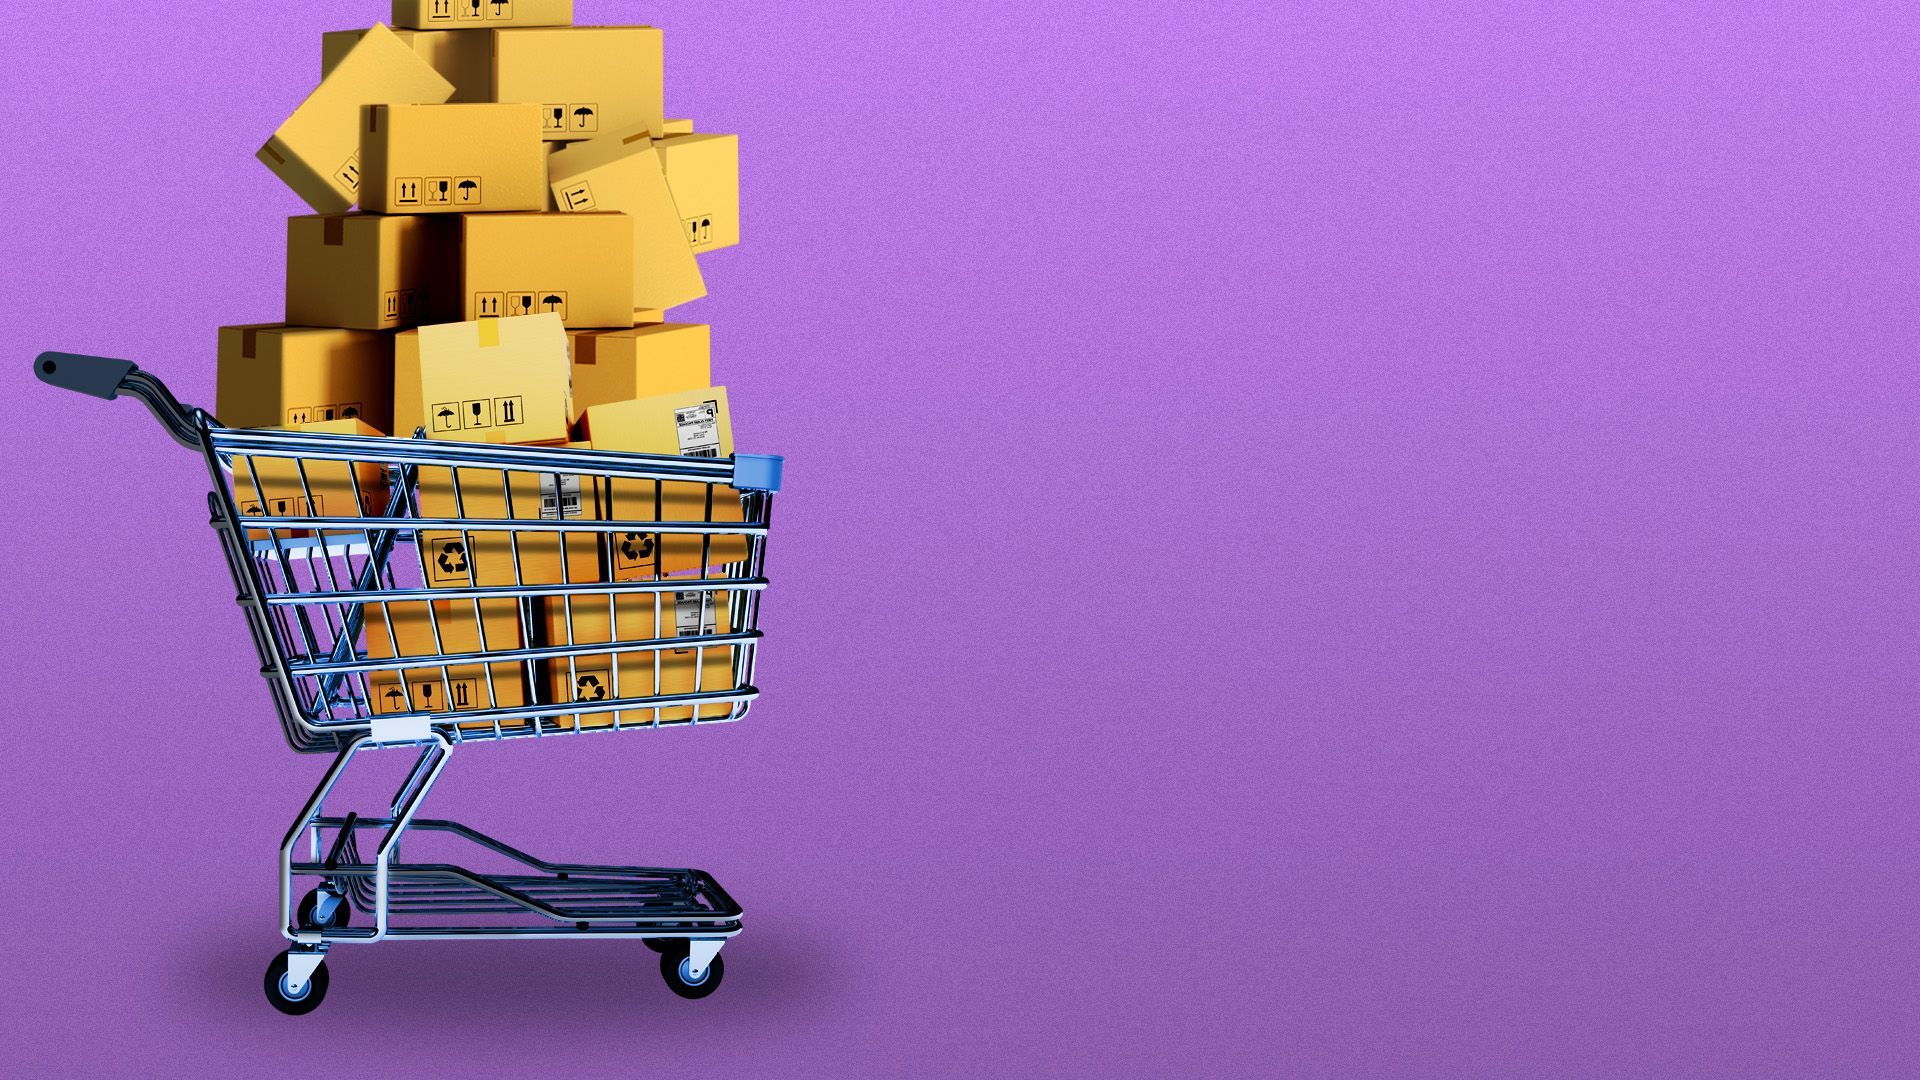 Illustration of a shopping cart overloaded with boxes